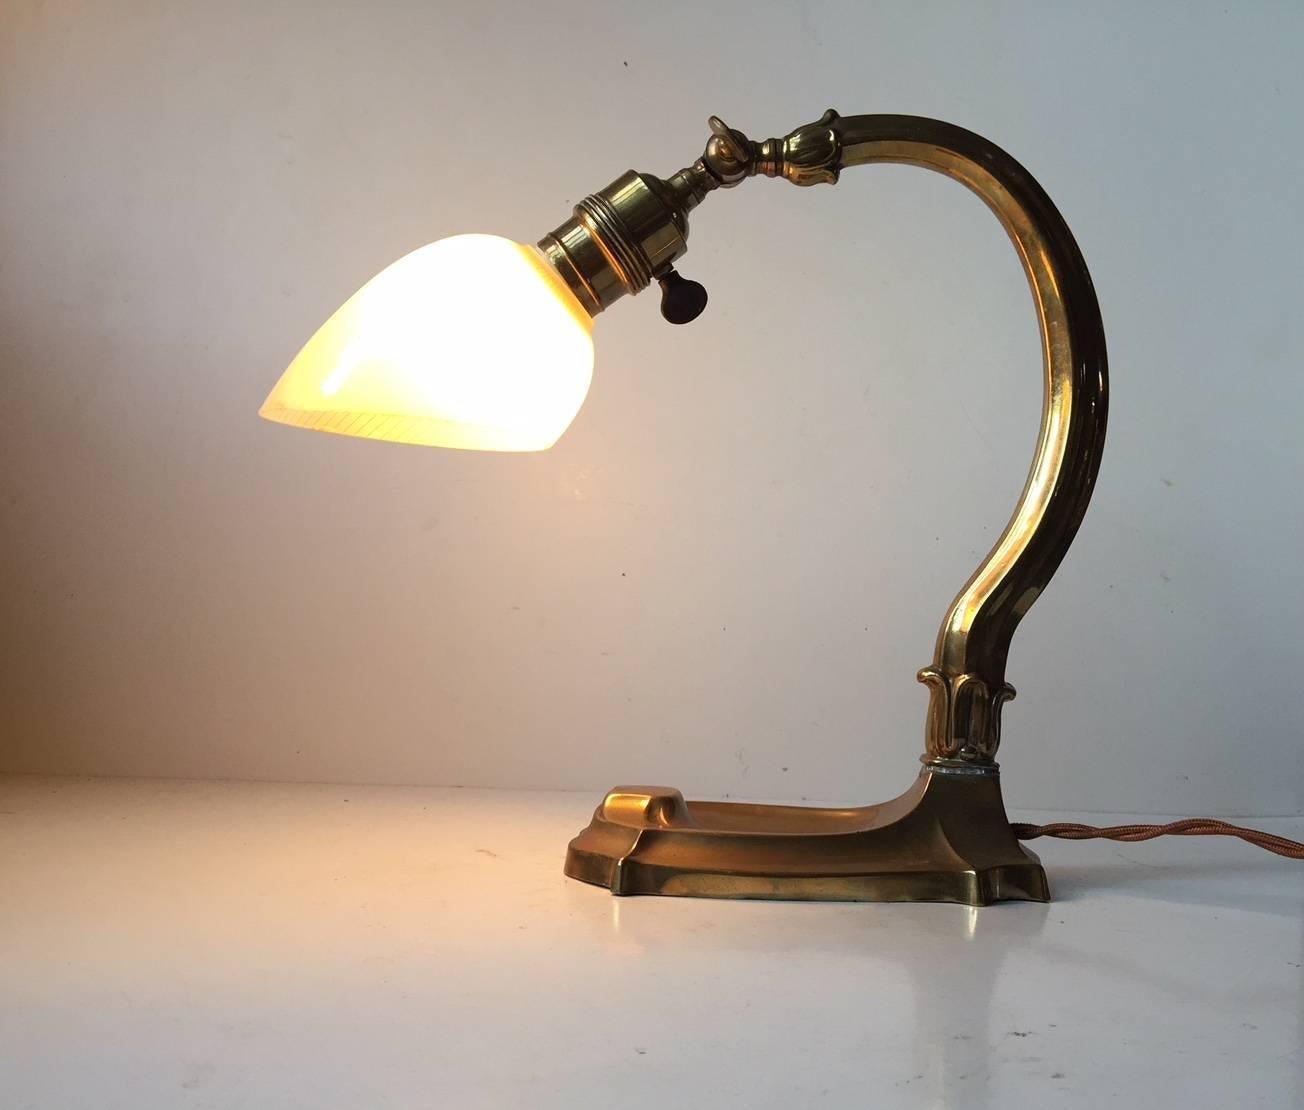 Patinated Danish Art Nouveau Table Lamp in Brass and Pin-Striped Glass, 1920s